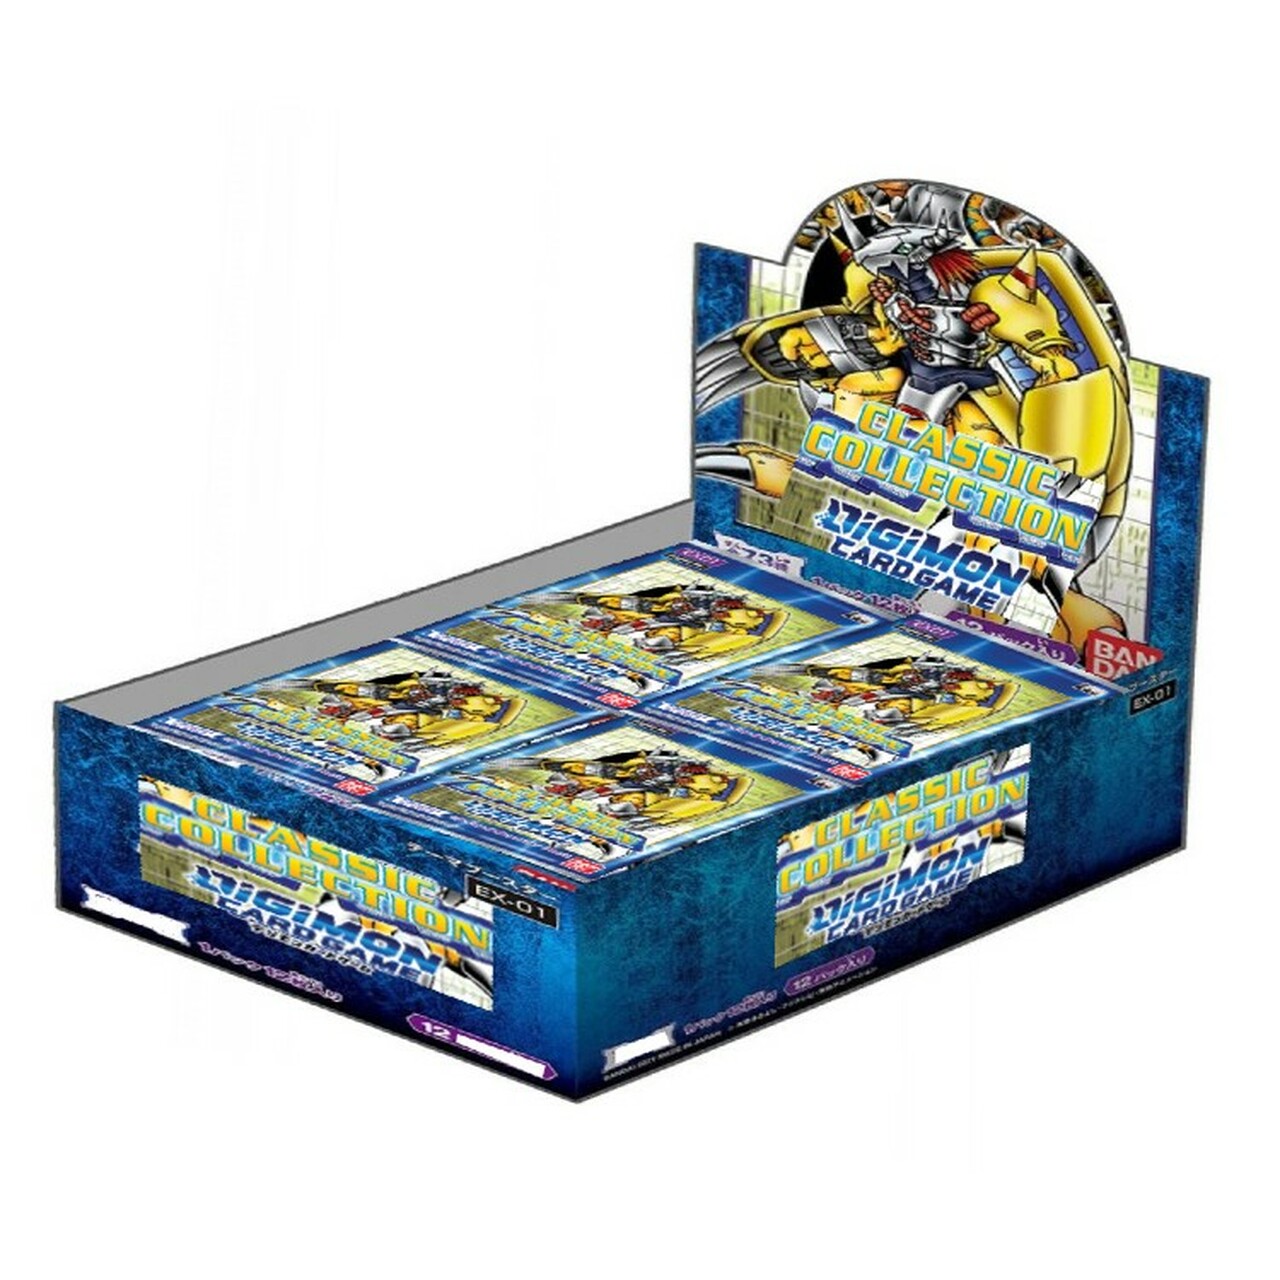 Digimon Card Game - Classic Collection (EX01) Booster Box *Sealed*